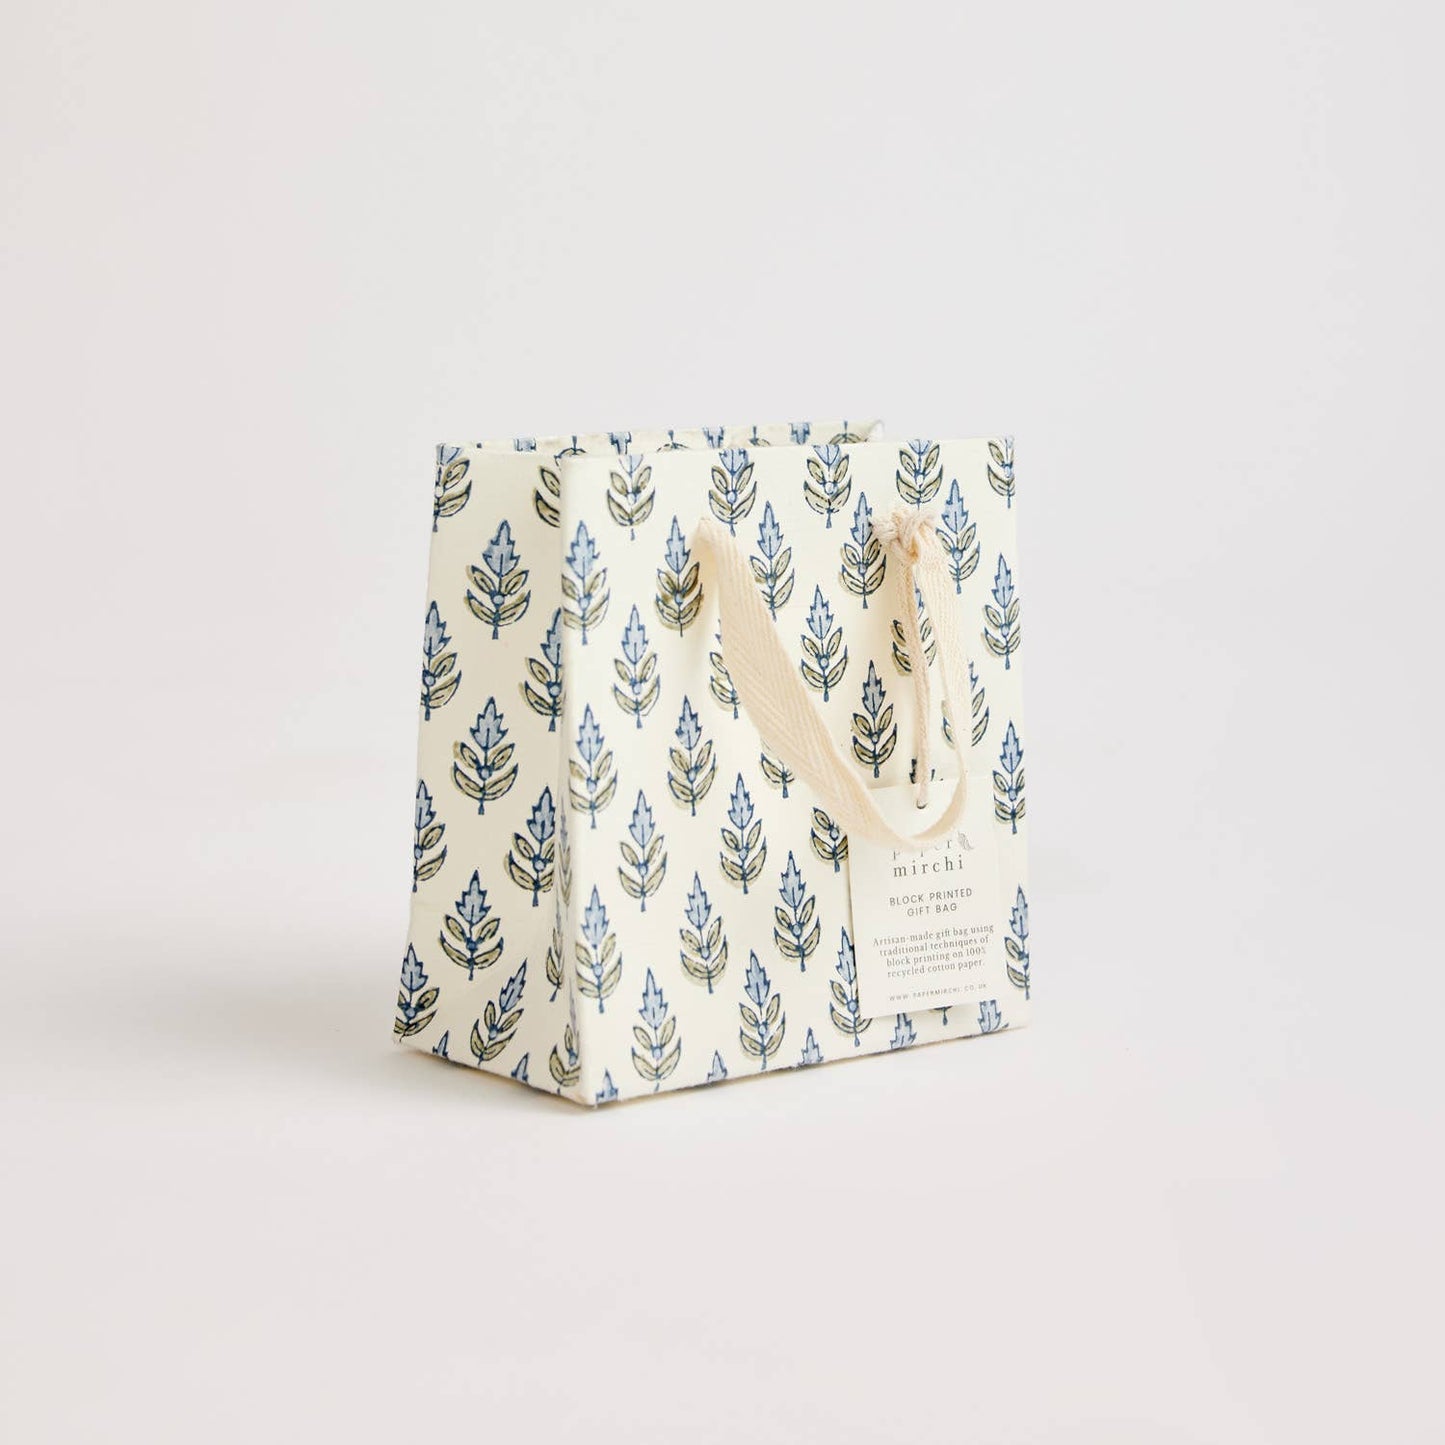 Paper Mirchi - Hand Block Printed Gift Bags (Small) - Blue Stone